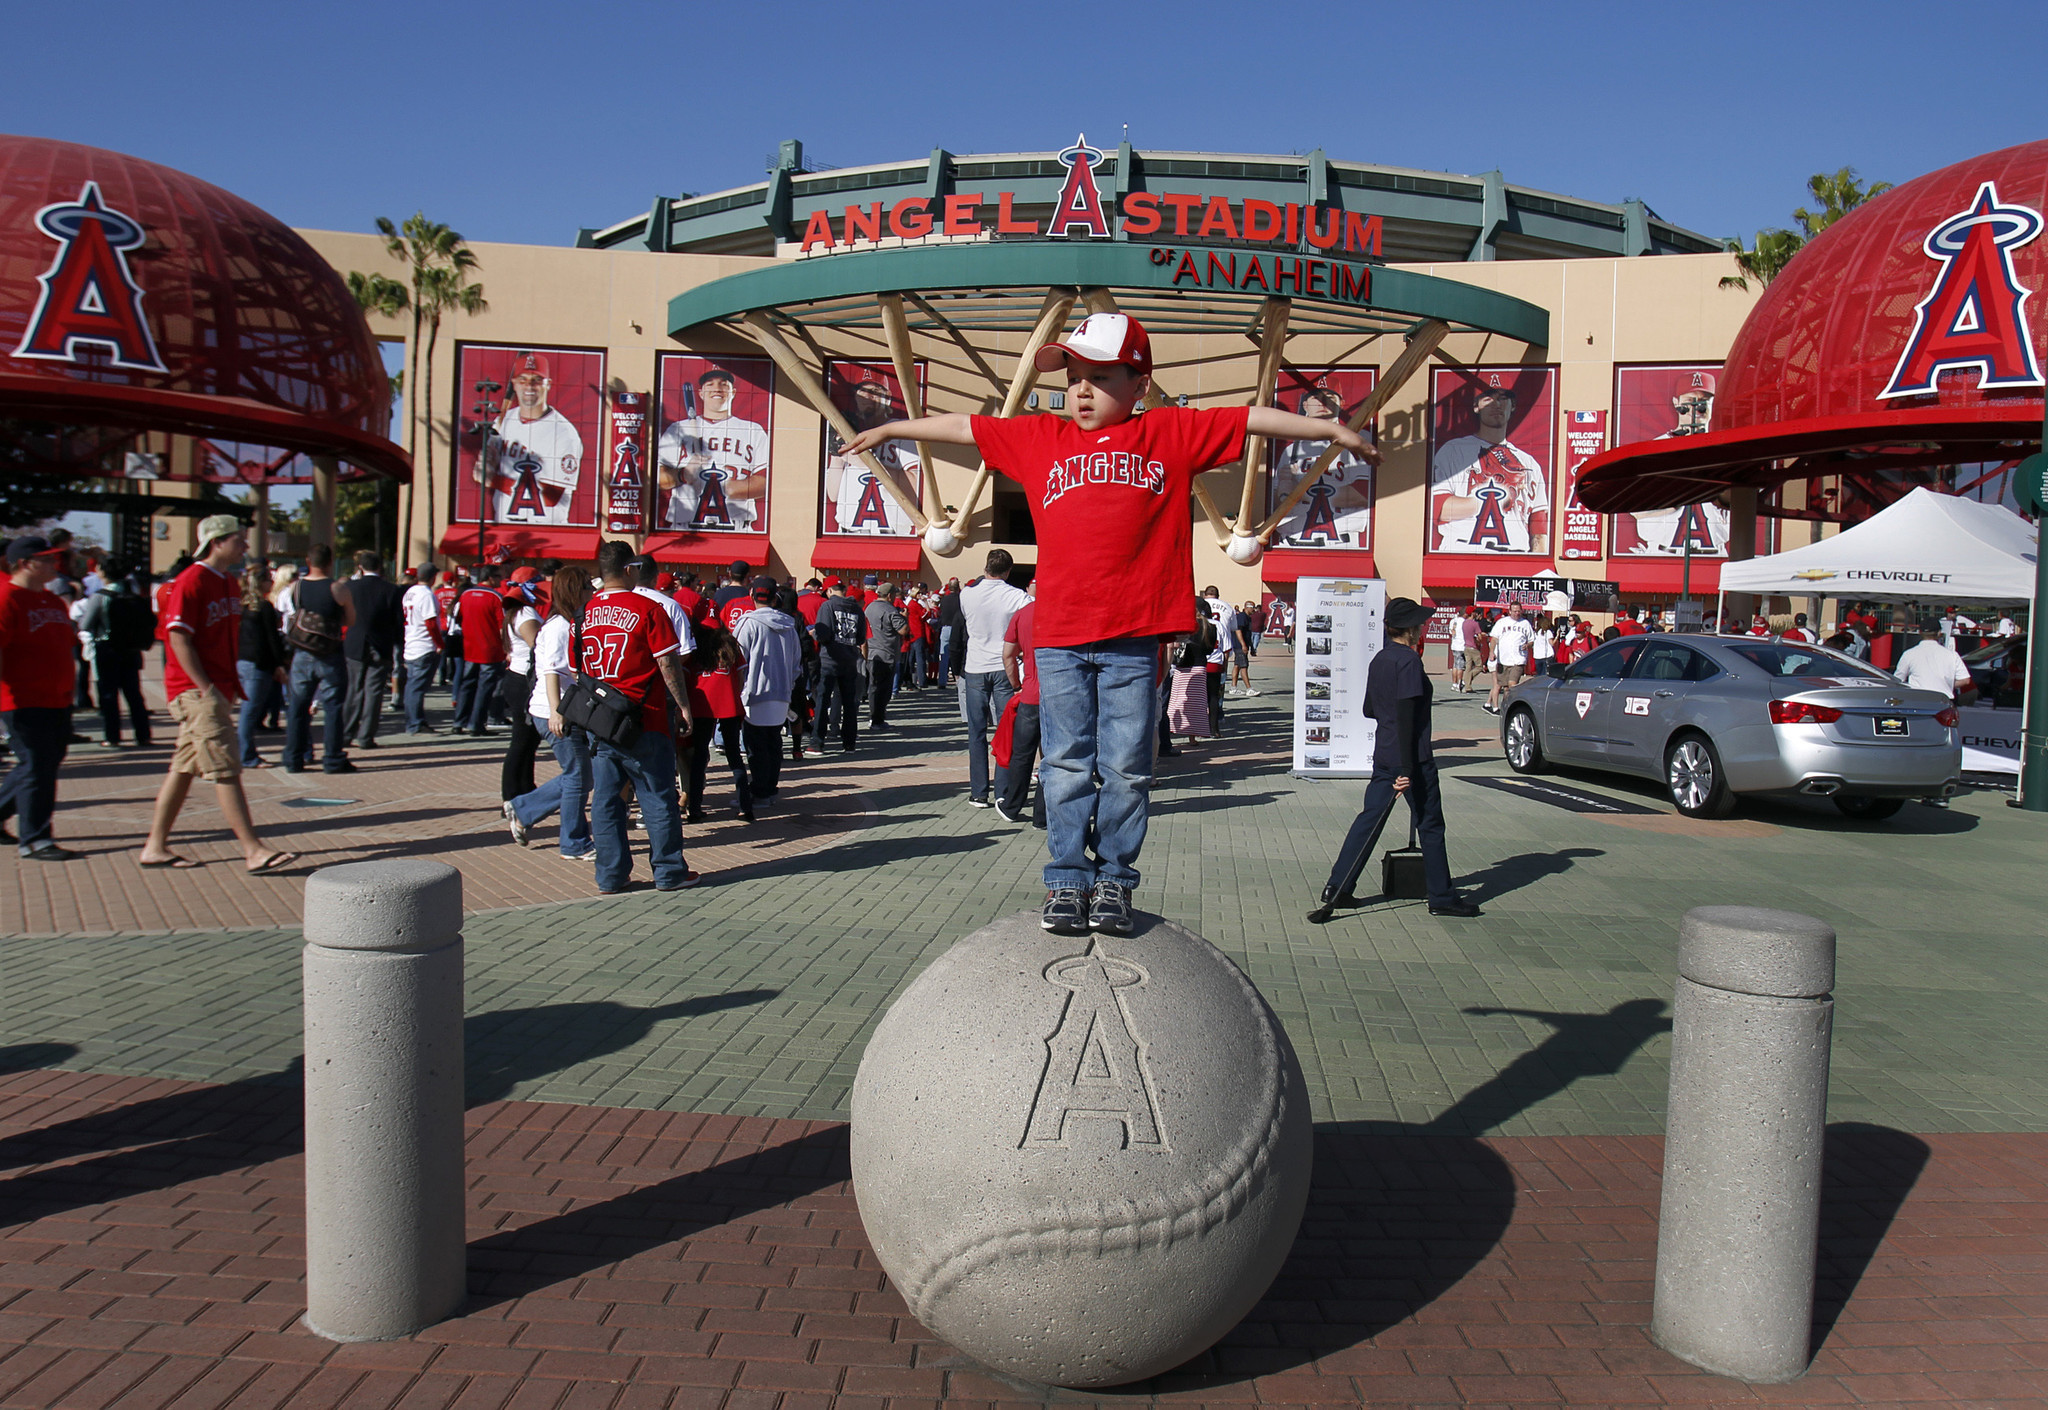 Frustrated Angels end talks with Anaheim on stadium lease - LA Times